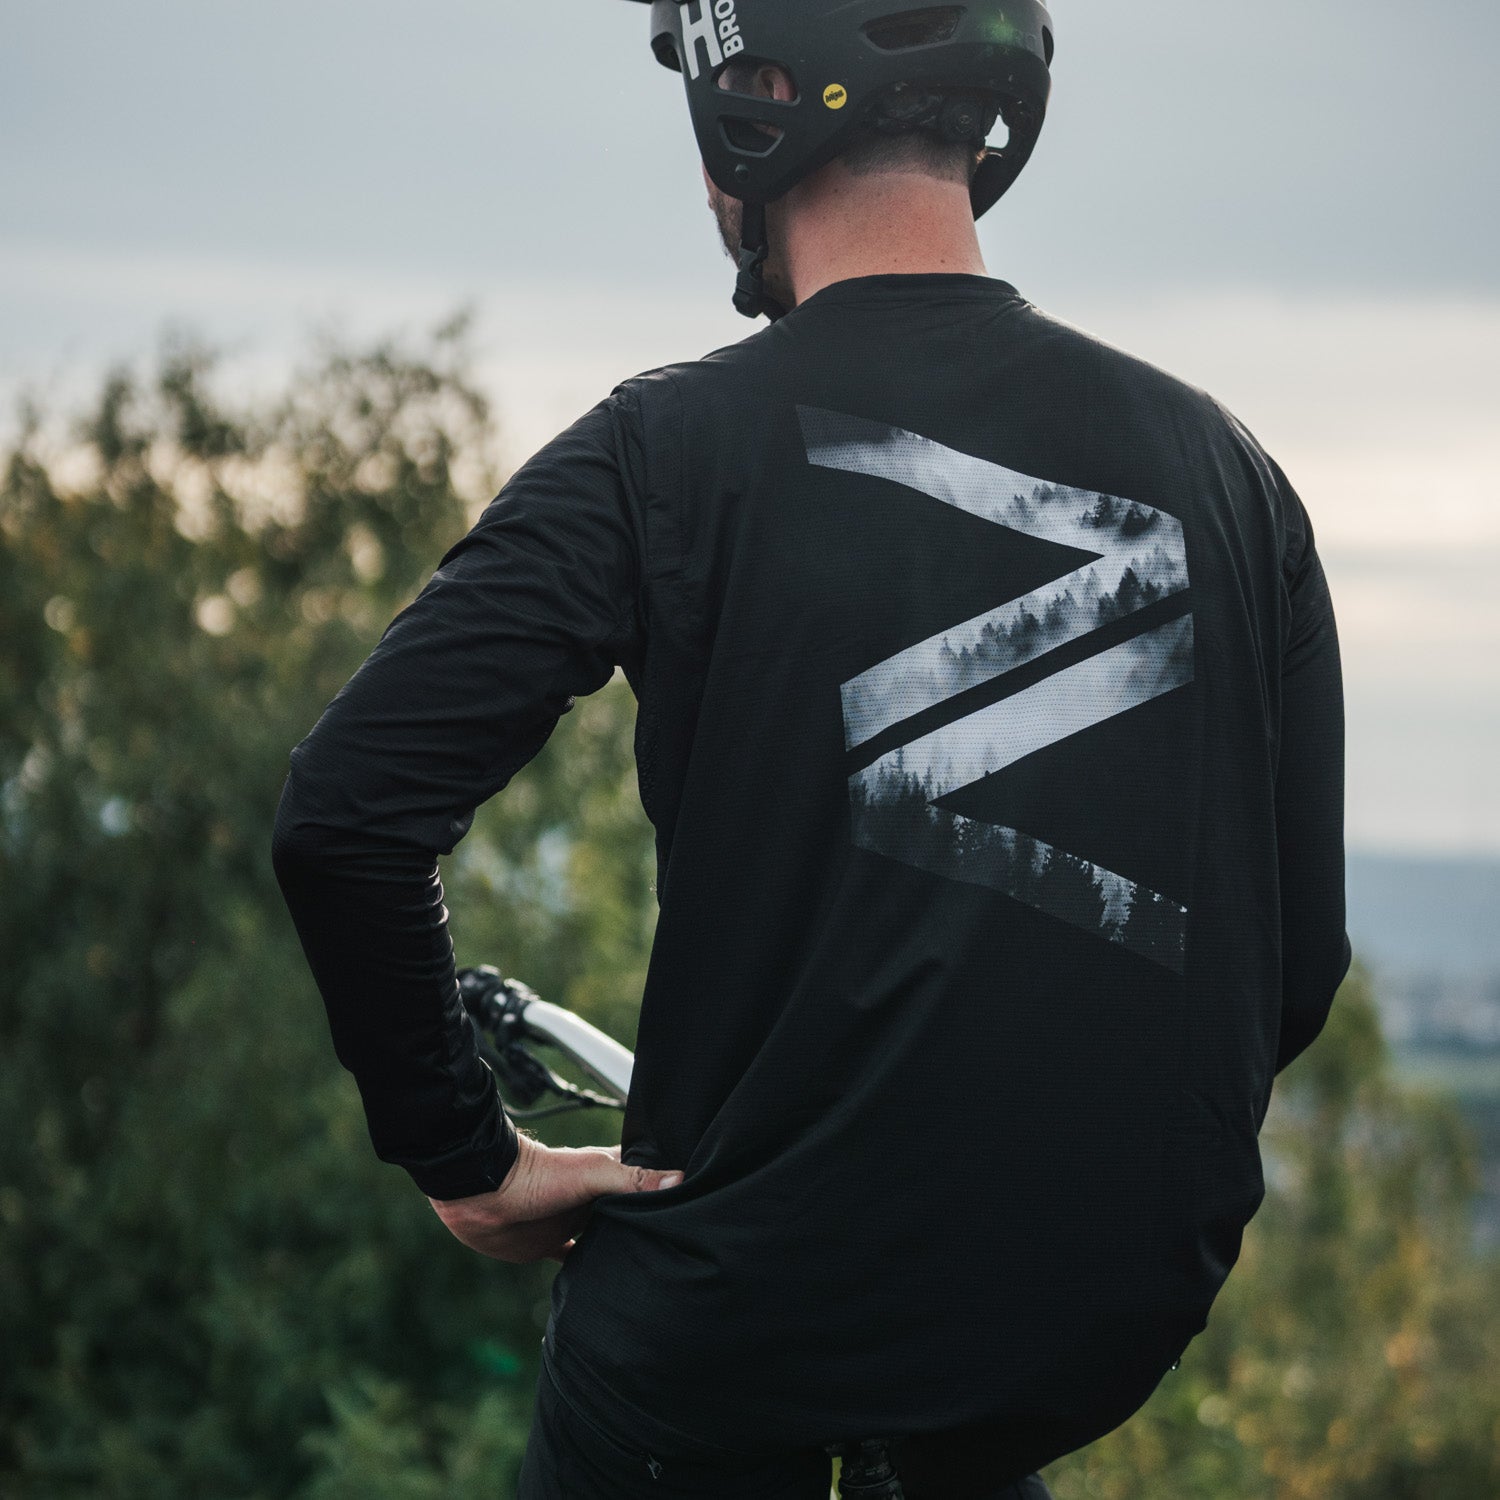 Performance-oriented black mountain bike jersey for downhill and enduro riders, with eco-conscious long sleeve design